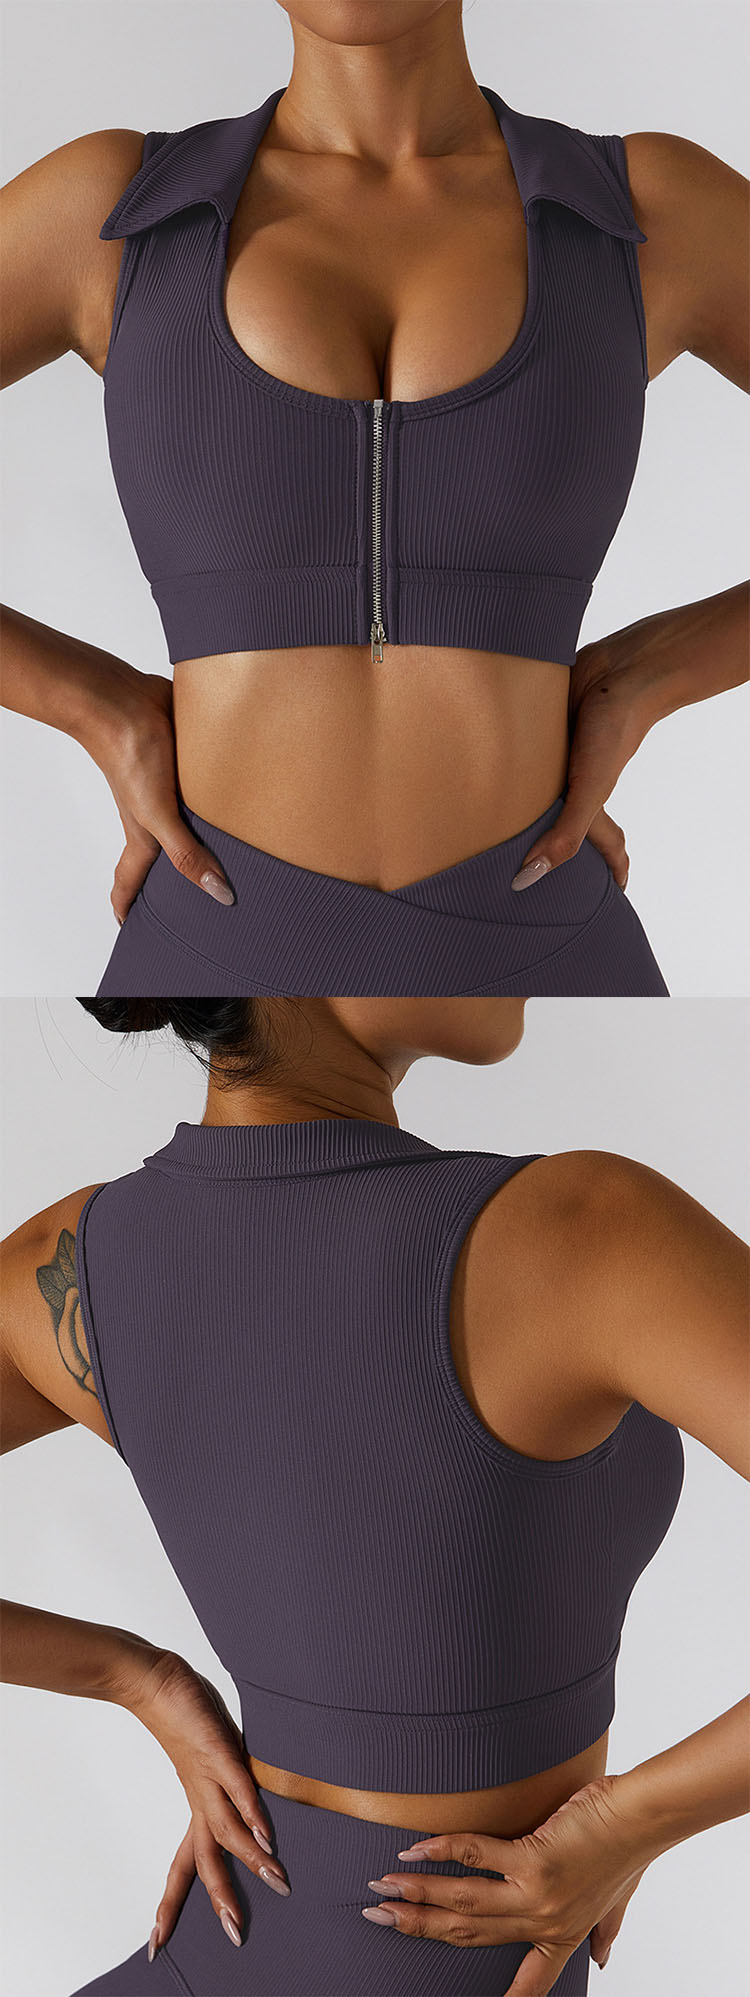 solves the disadvantage of weak support of no-wire bra products, and is extremely comfortable